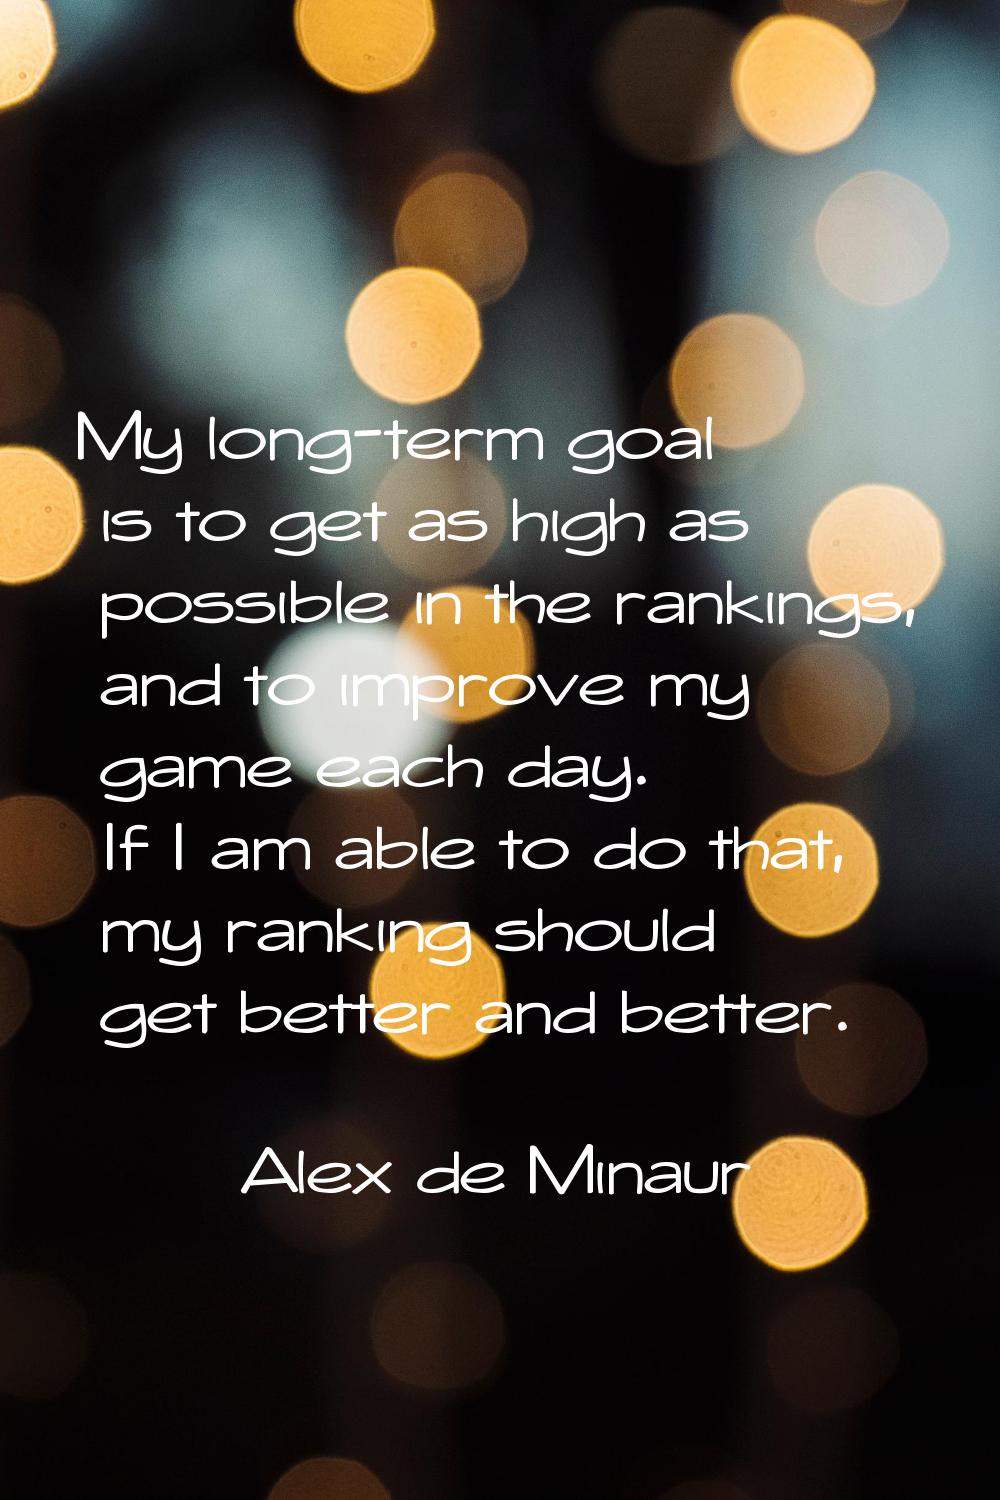 My long-term goal is to get as high as possible in the rankings, and to improve my game each day. I